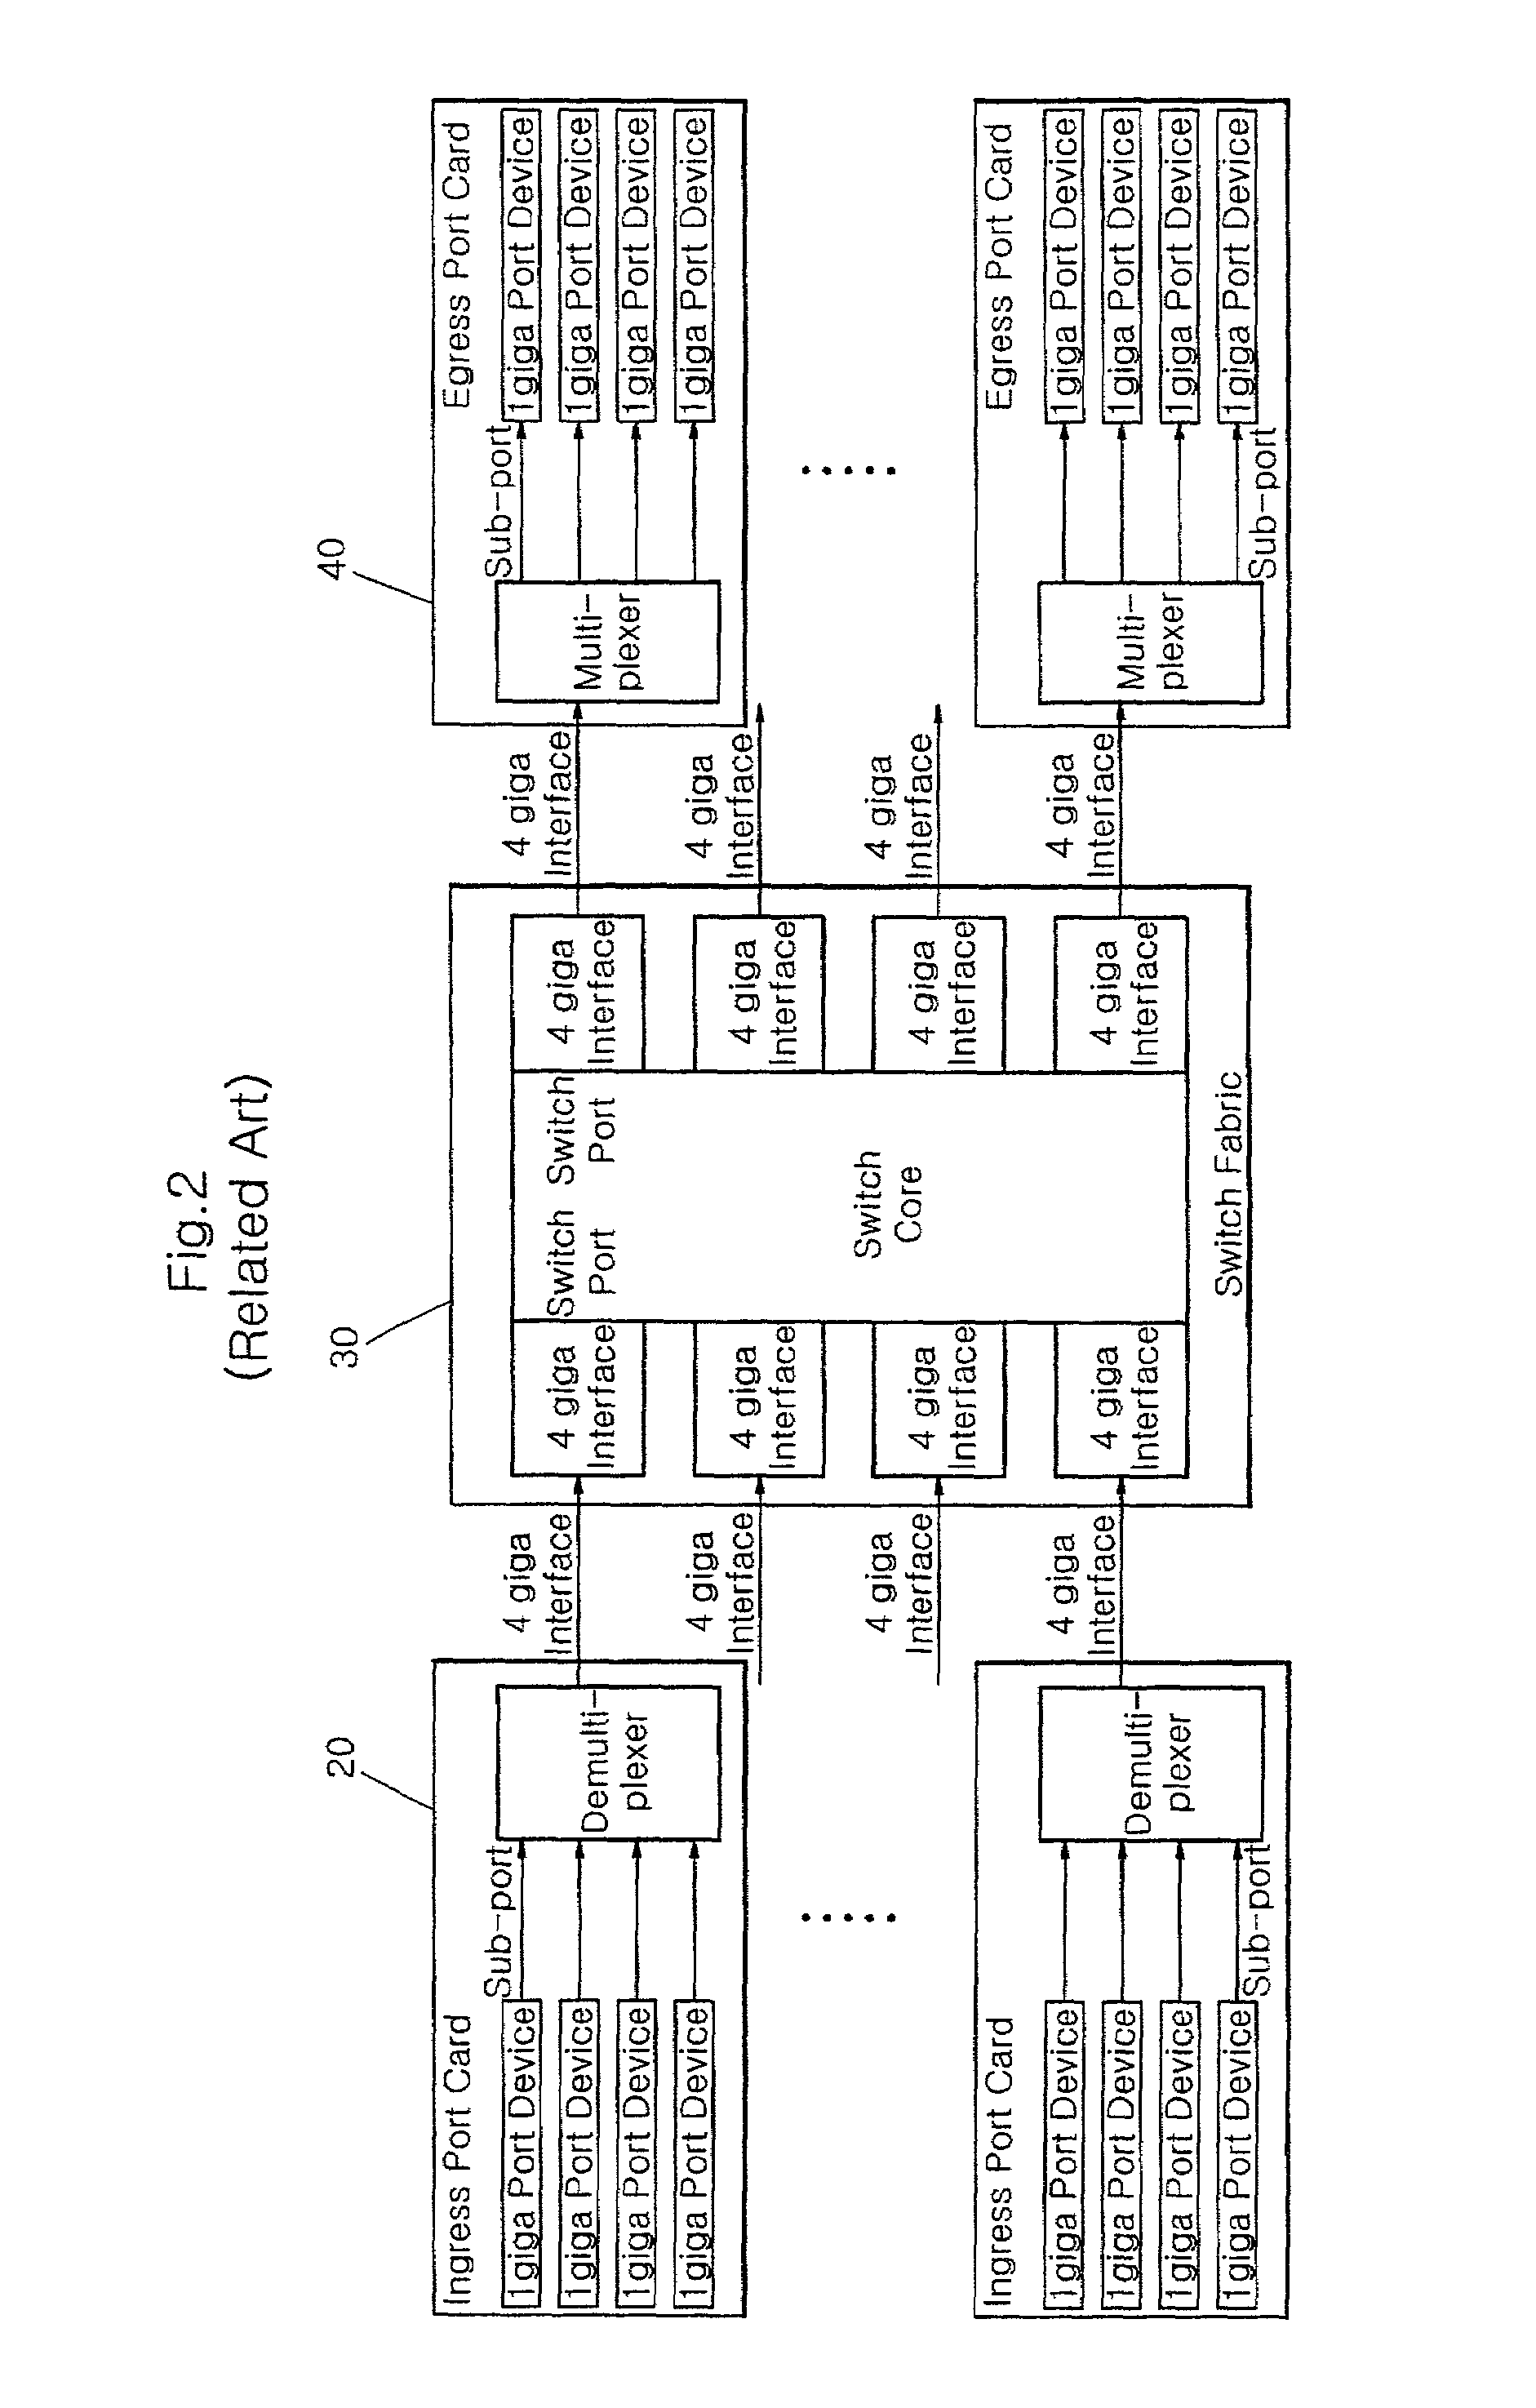 Method for sub-port multicasting in an ATM switching system